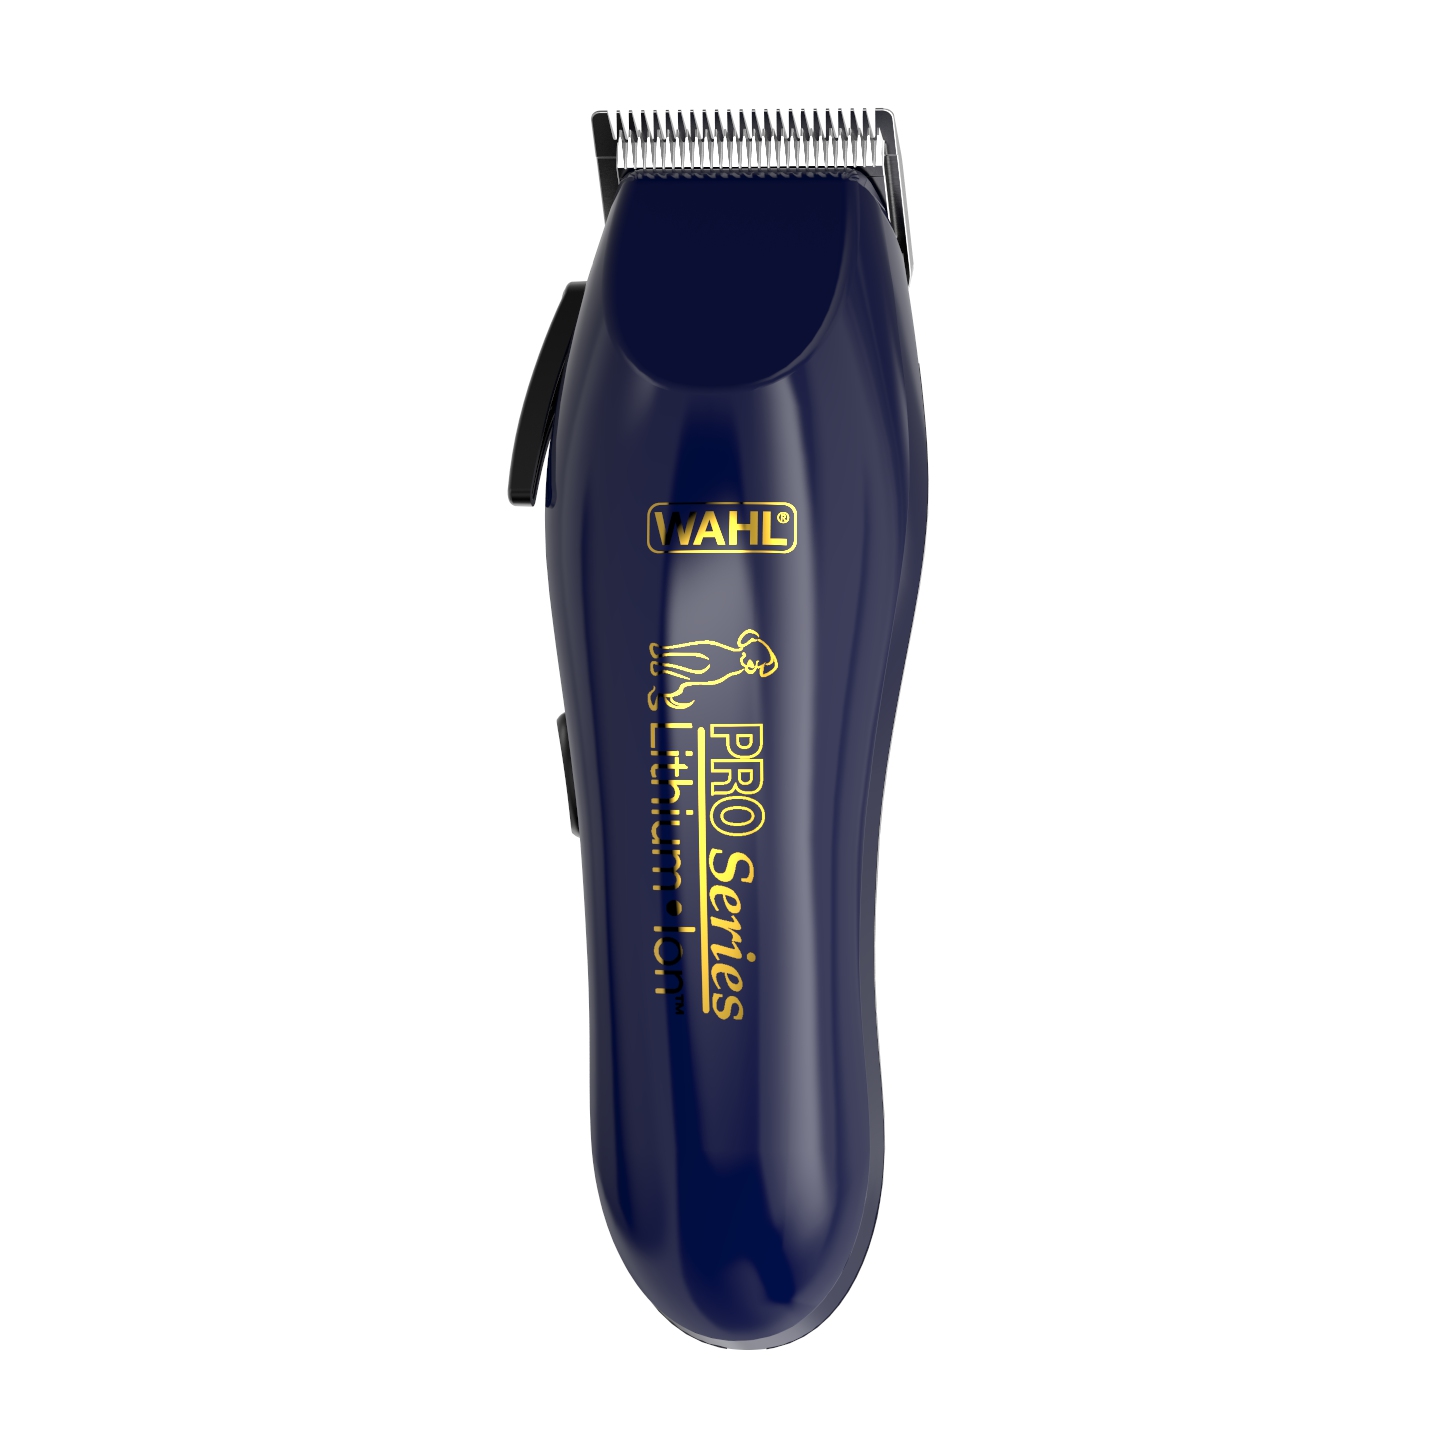 wahl pro series rechargeable pet hair clipper kit